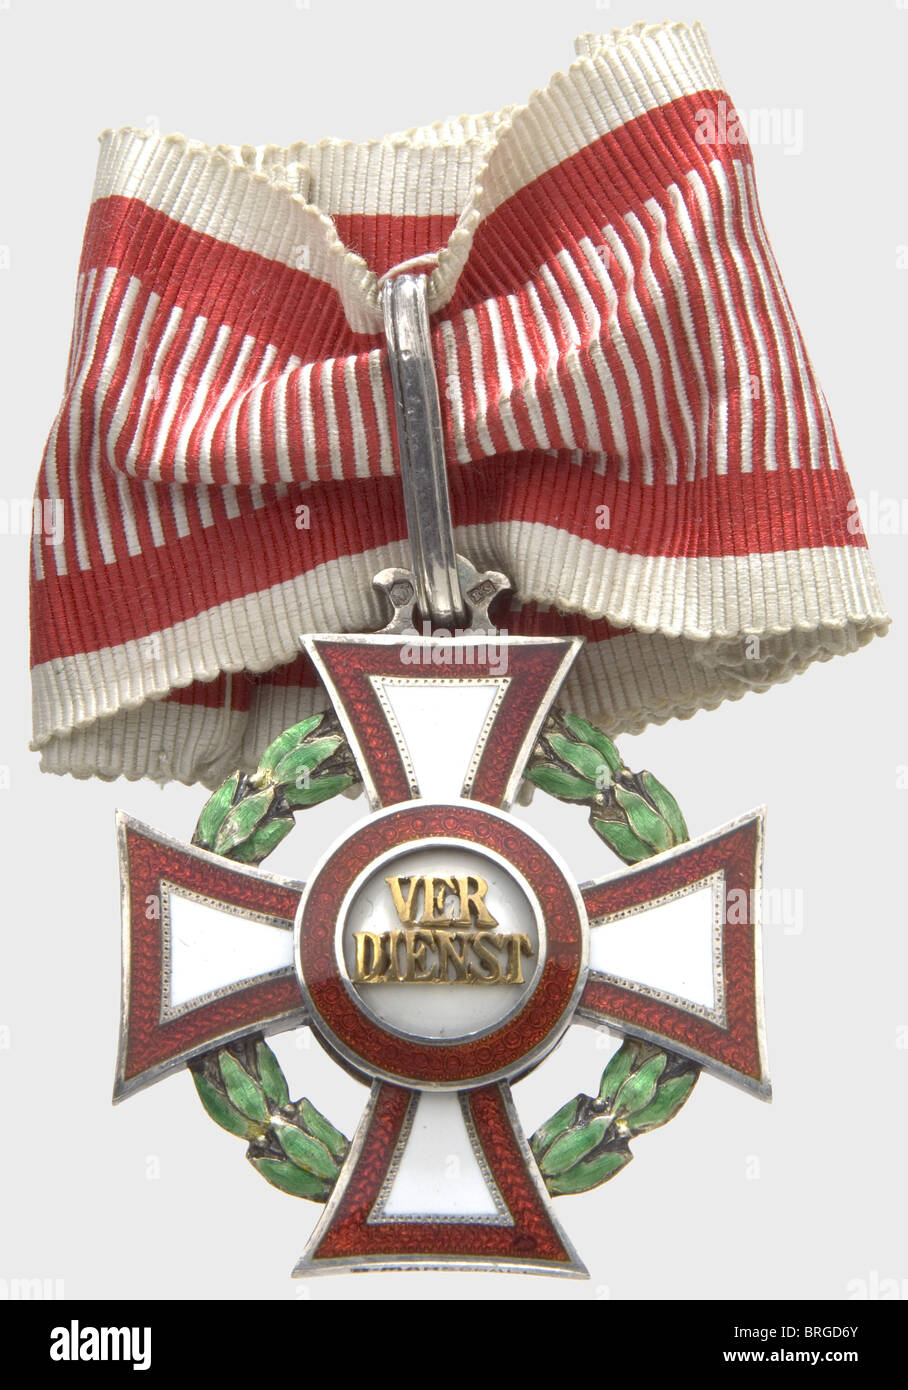 Austrian Military Merit Cross, a 2nd Class Cross with War Decoration Silver and enamel with the motto in gold. Fineness mark '900' on the eyelet (Diana 2A) and 'RS' for Rudolf Souval, 'R. Marschall' on lower cross arm. The suspension ring punched 'A3' for 800 silver. The 40 mm neck ribbon is included. Perfect condition., historic, historical, 19th century, medal, decoration, medals, decorations, badge of honour, badge of honor, badges of honour, badges of honor, object, objects, stills, clipping, clippings, cut out, cut-out, cut-outs, Additional-Rights-Clearences-Not Available Stock Photo